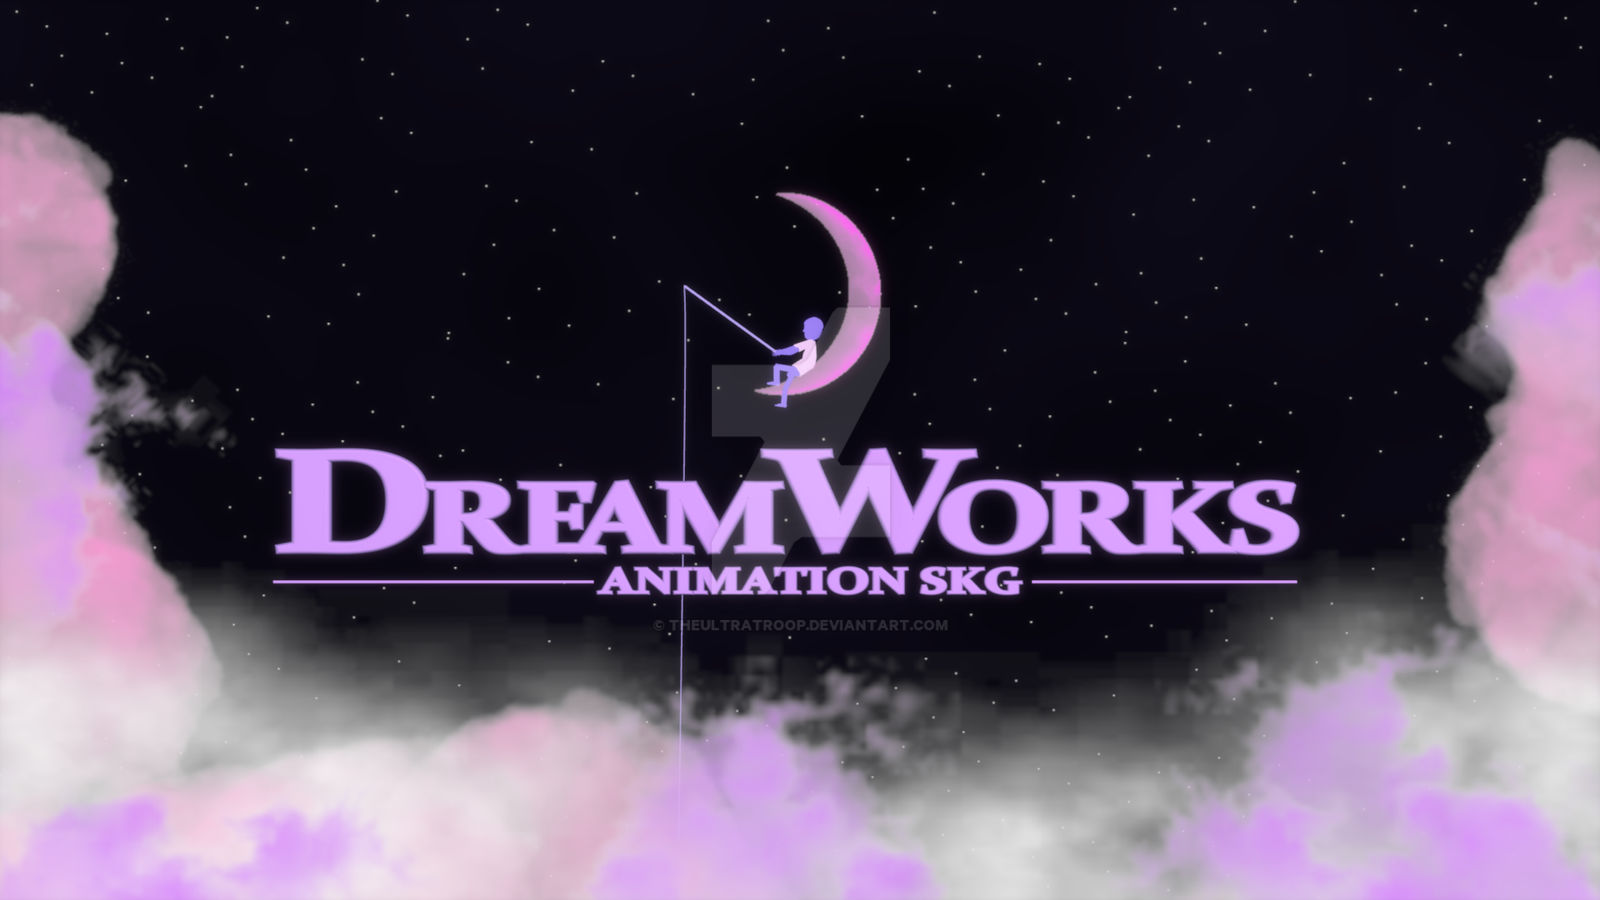 DreamWorks Animation Logo 2010 Remake by theultratroop on DeviantArt